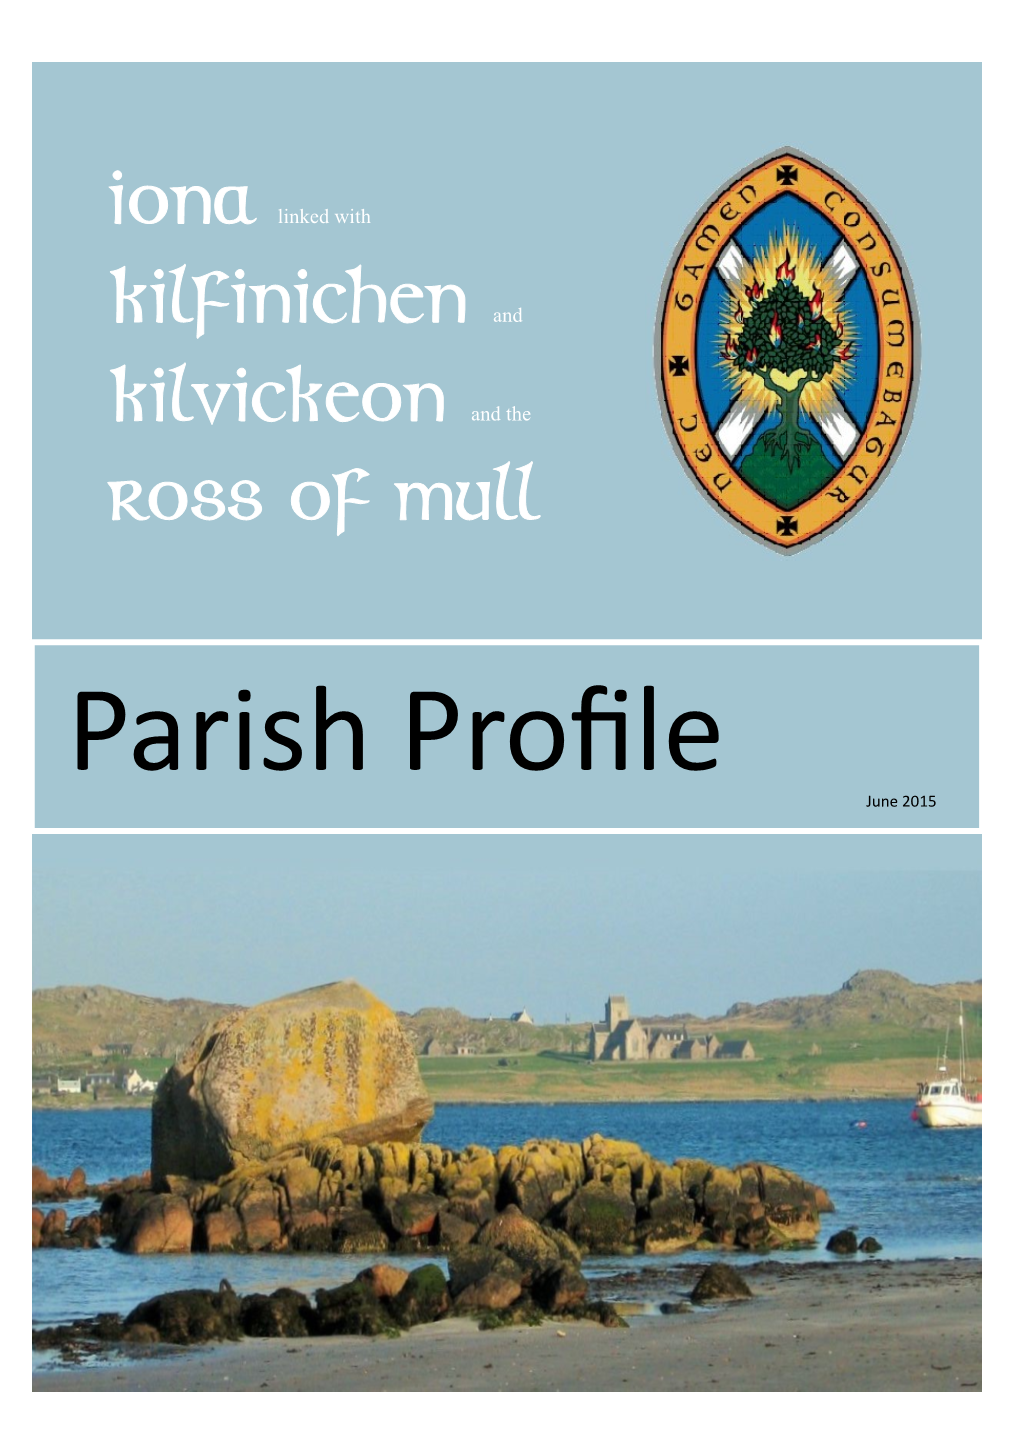 Iona Linked with Kilfinichen and Kilvickeon and the Ross of Mull